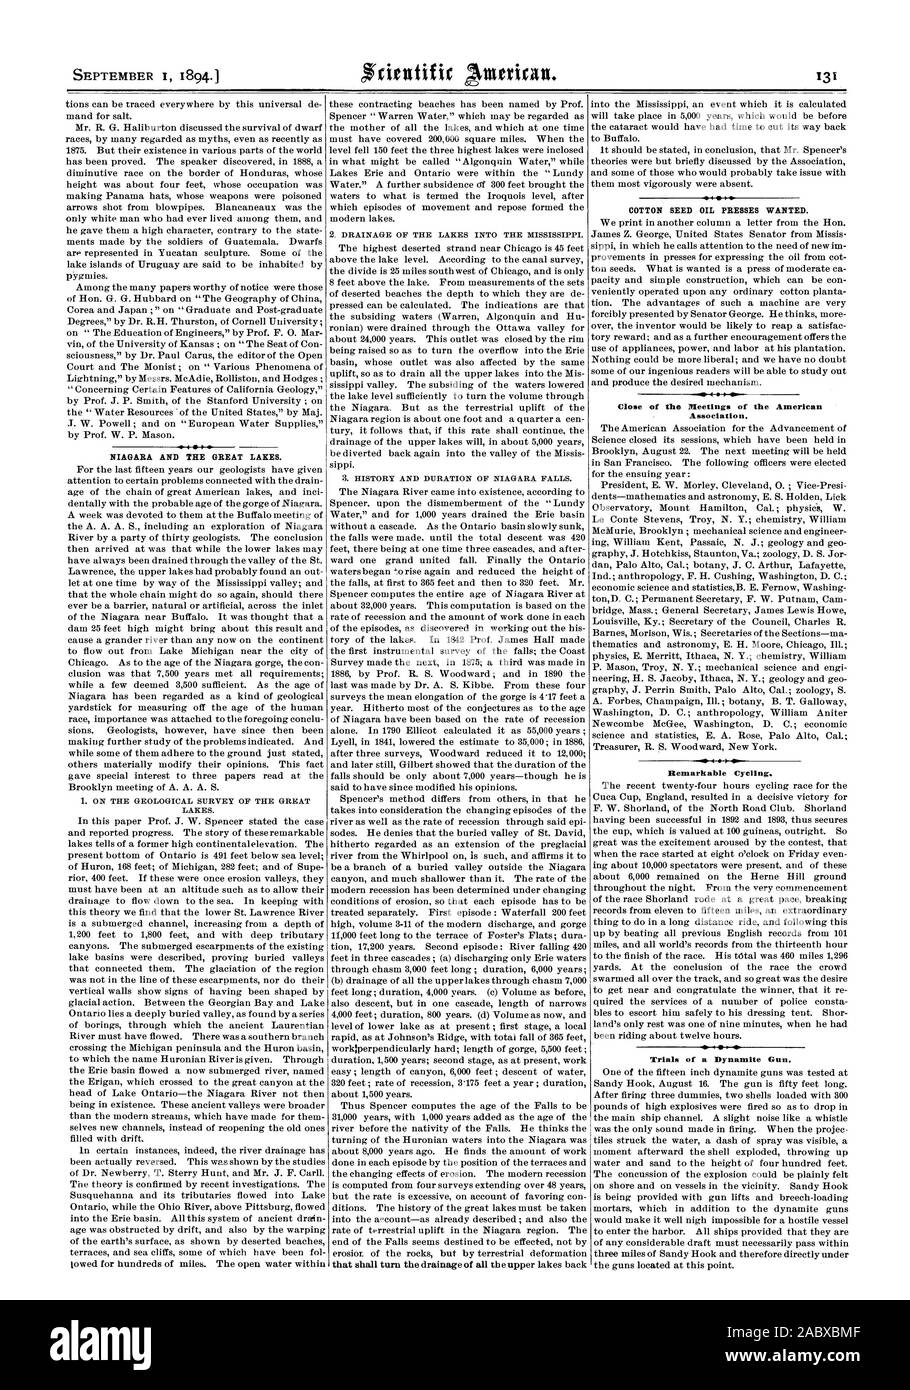 NIAGARA AND THE GREAT LAKES. COTTON SEED OIL PRESSES WANTED. Close of the Meetings of the American Association. Remarkable Cycling. Trials of a Dynamite Gan., scientific american, 1894-09-01 Stock Photo